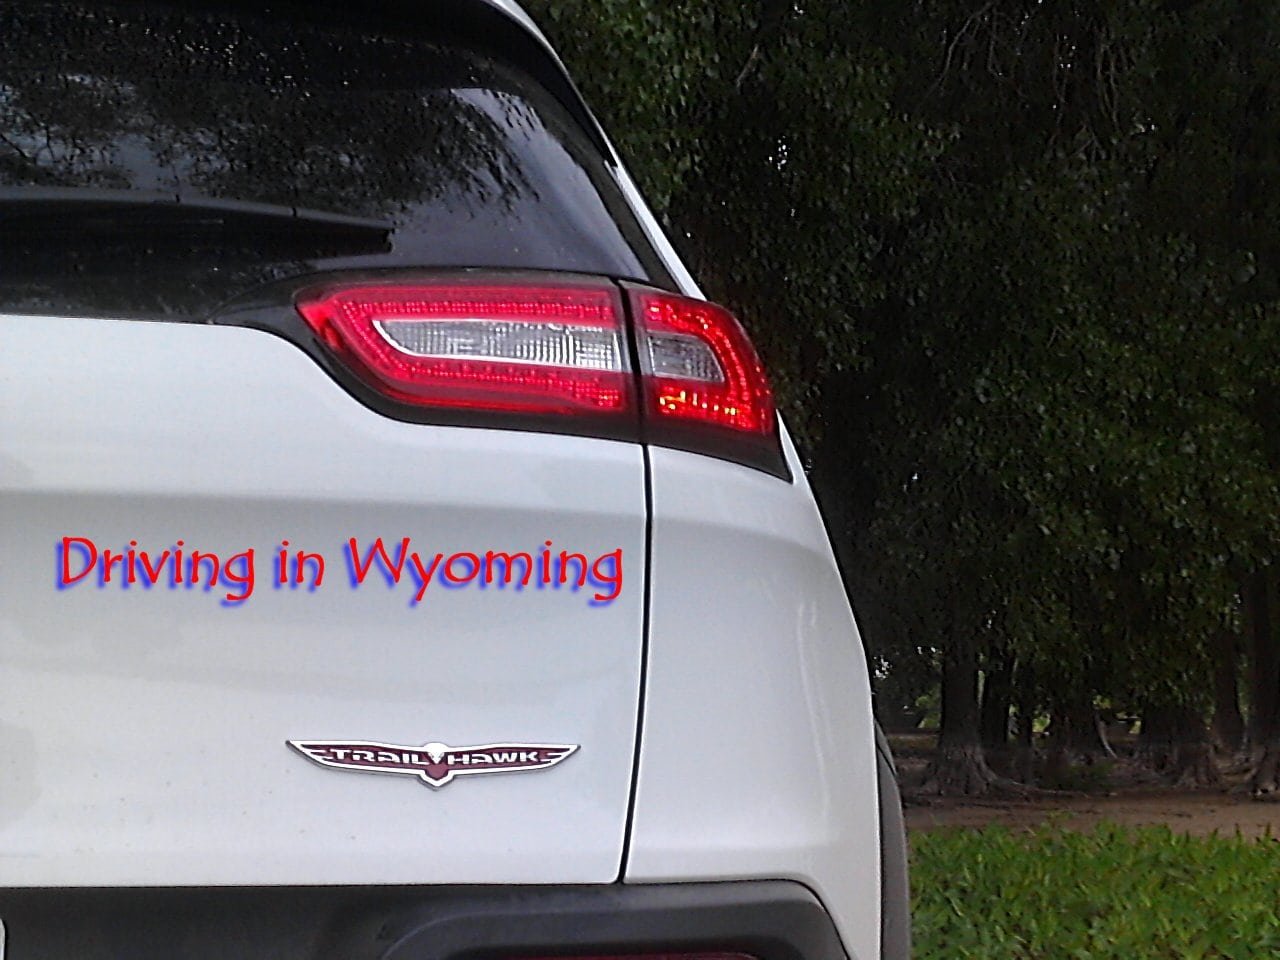 2014 Jeep Cherokee Trailhawk Driving in Wyoming Quick Poll